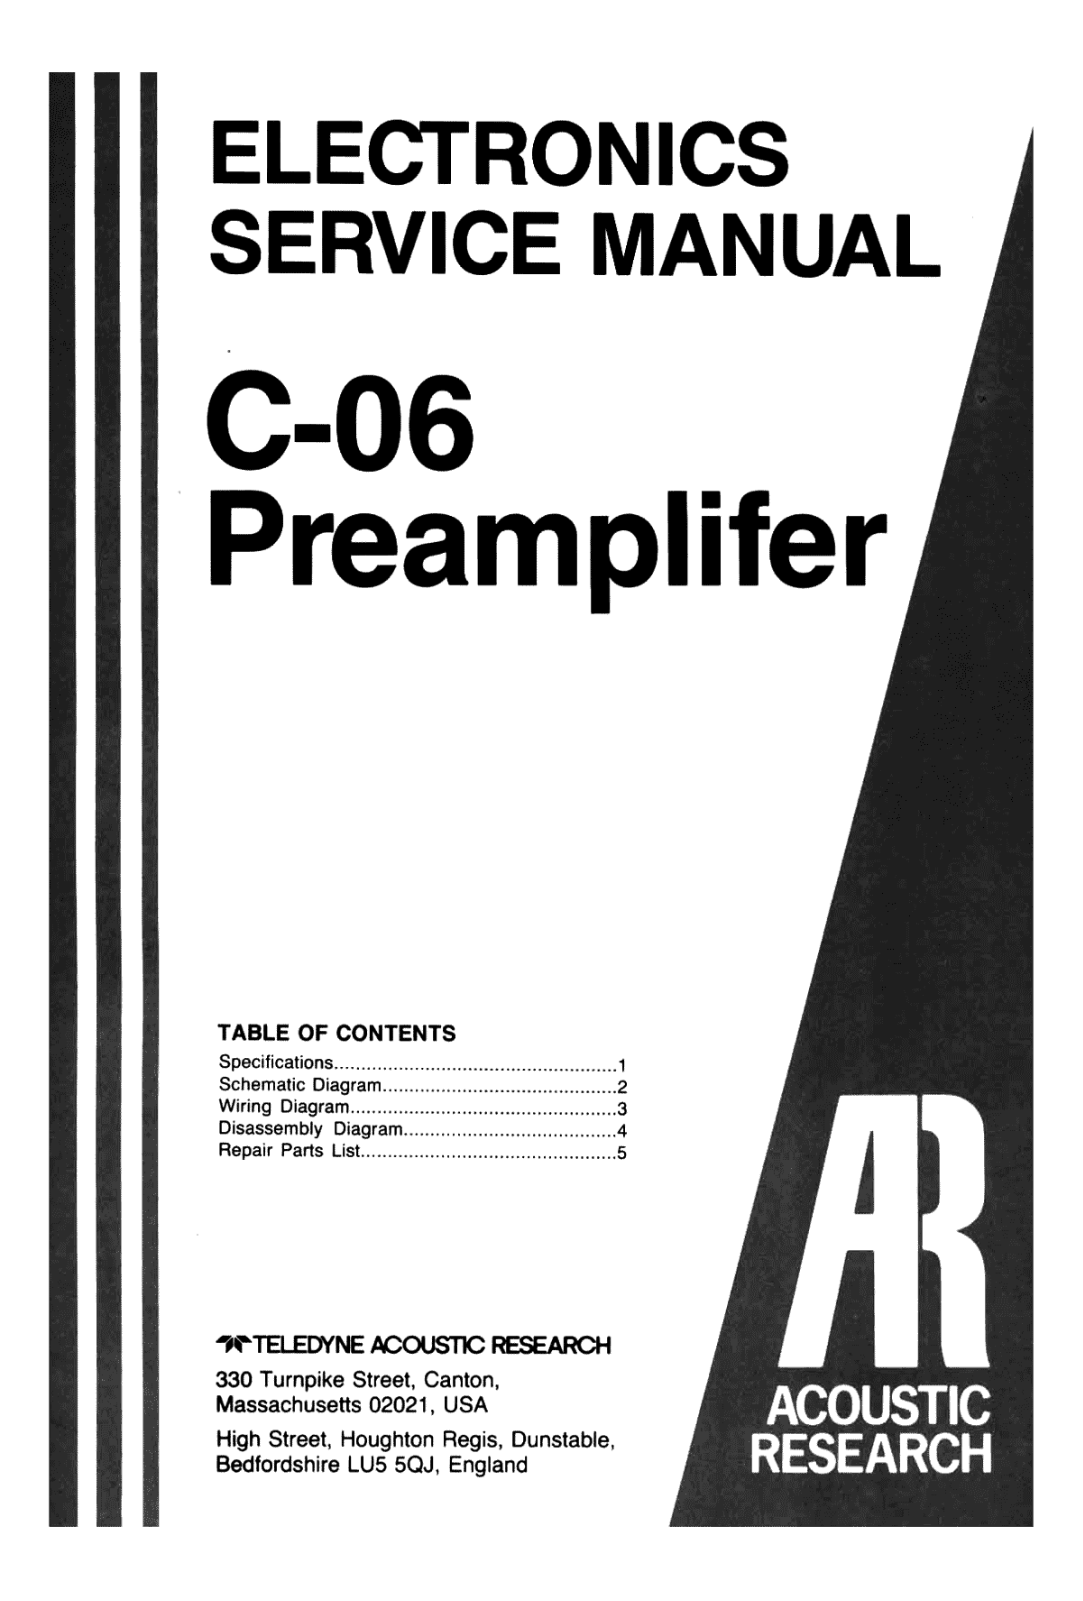 Acoustic Research C-06 Service manual